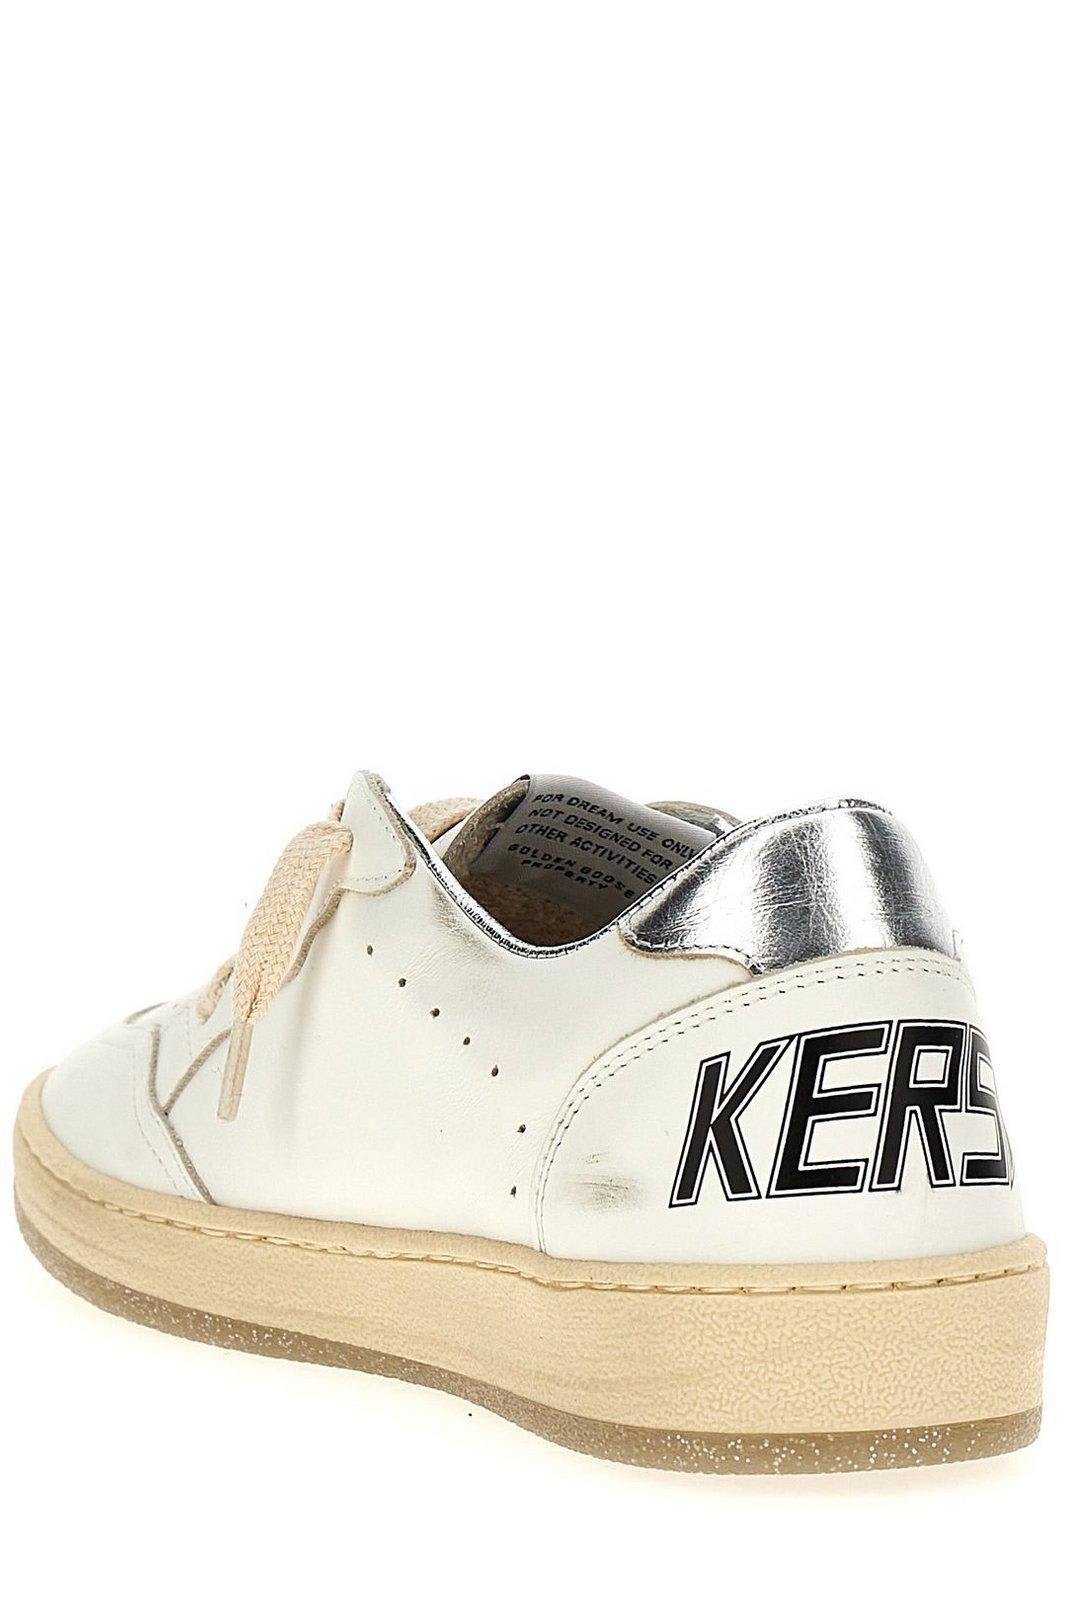 Shop Golden Goose Kids Ball Star-patch Lace-up Sneakers In White/pink/light Blue